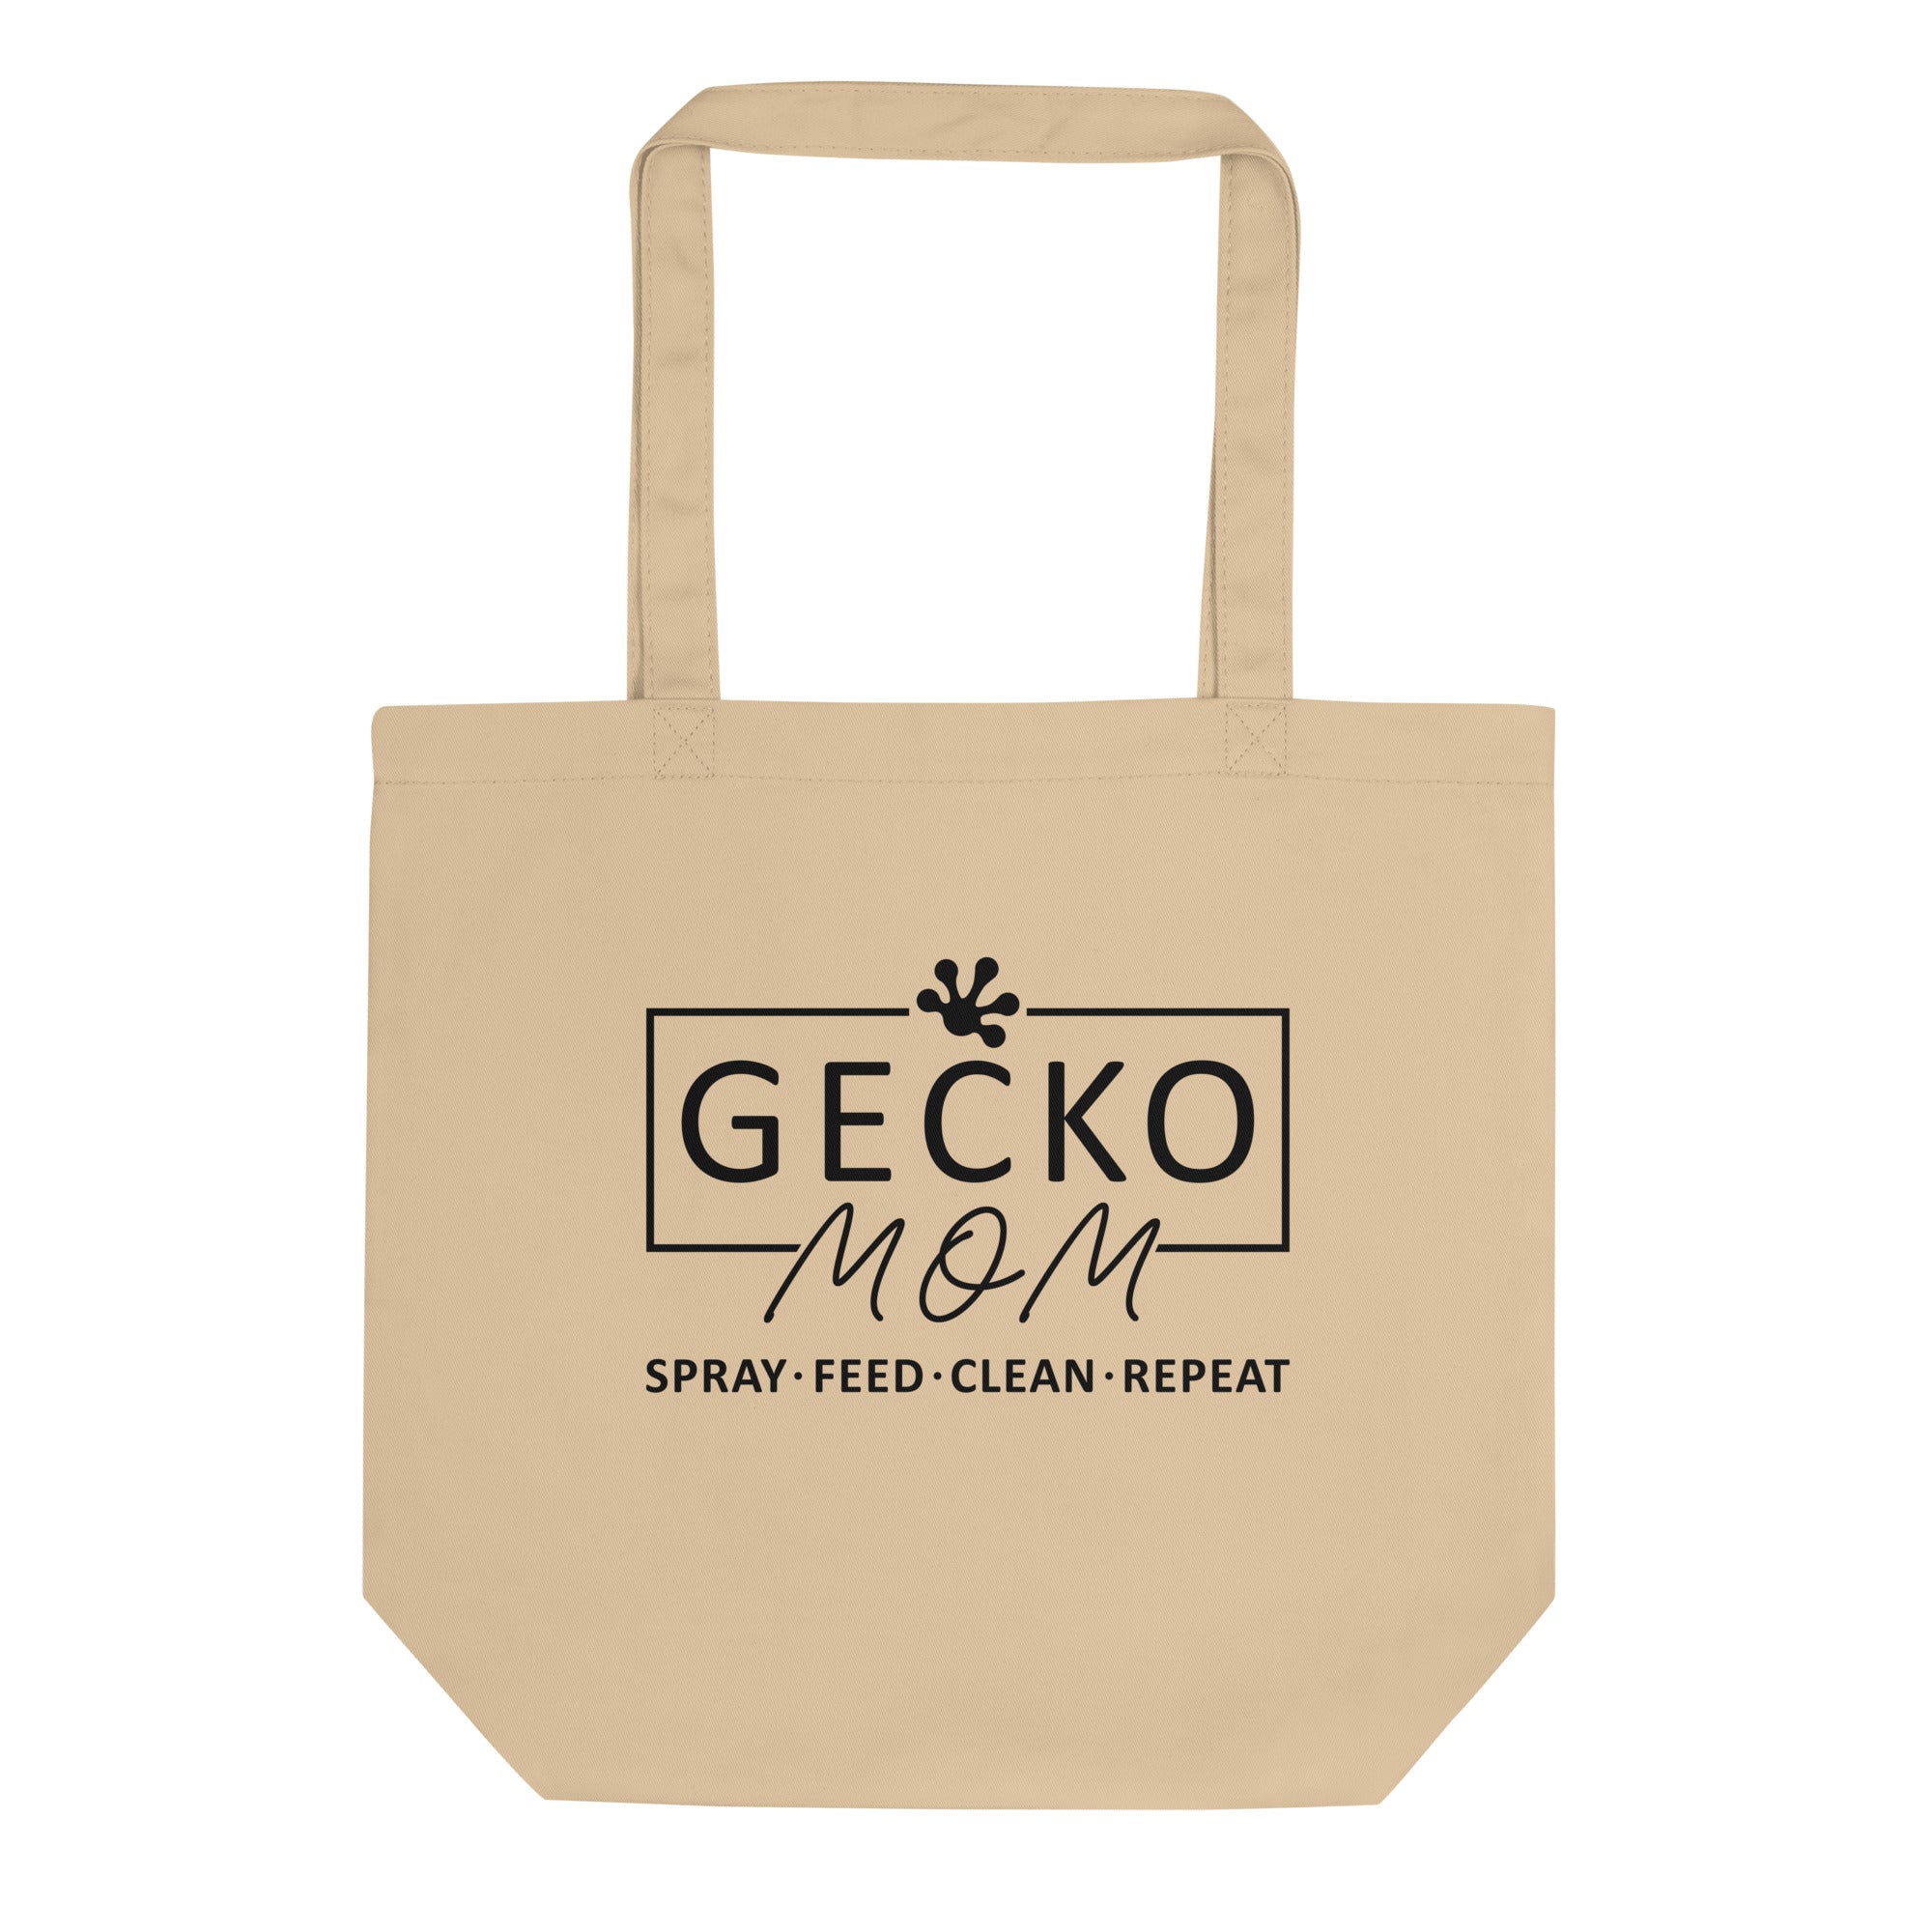 Gecko Mom Spray, Feed, Clean, Repeat Eco Tote Bag